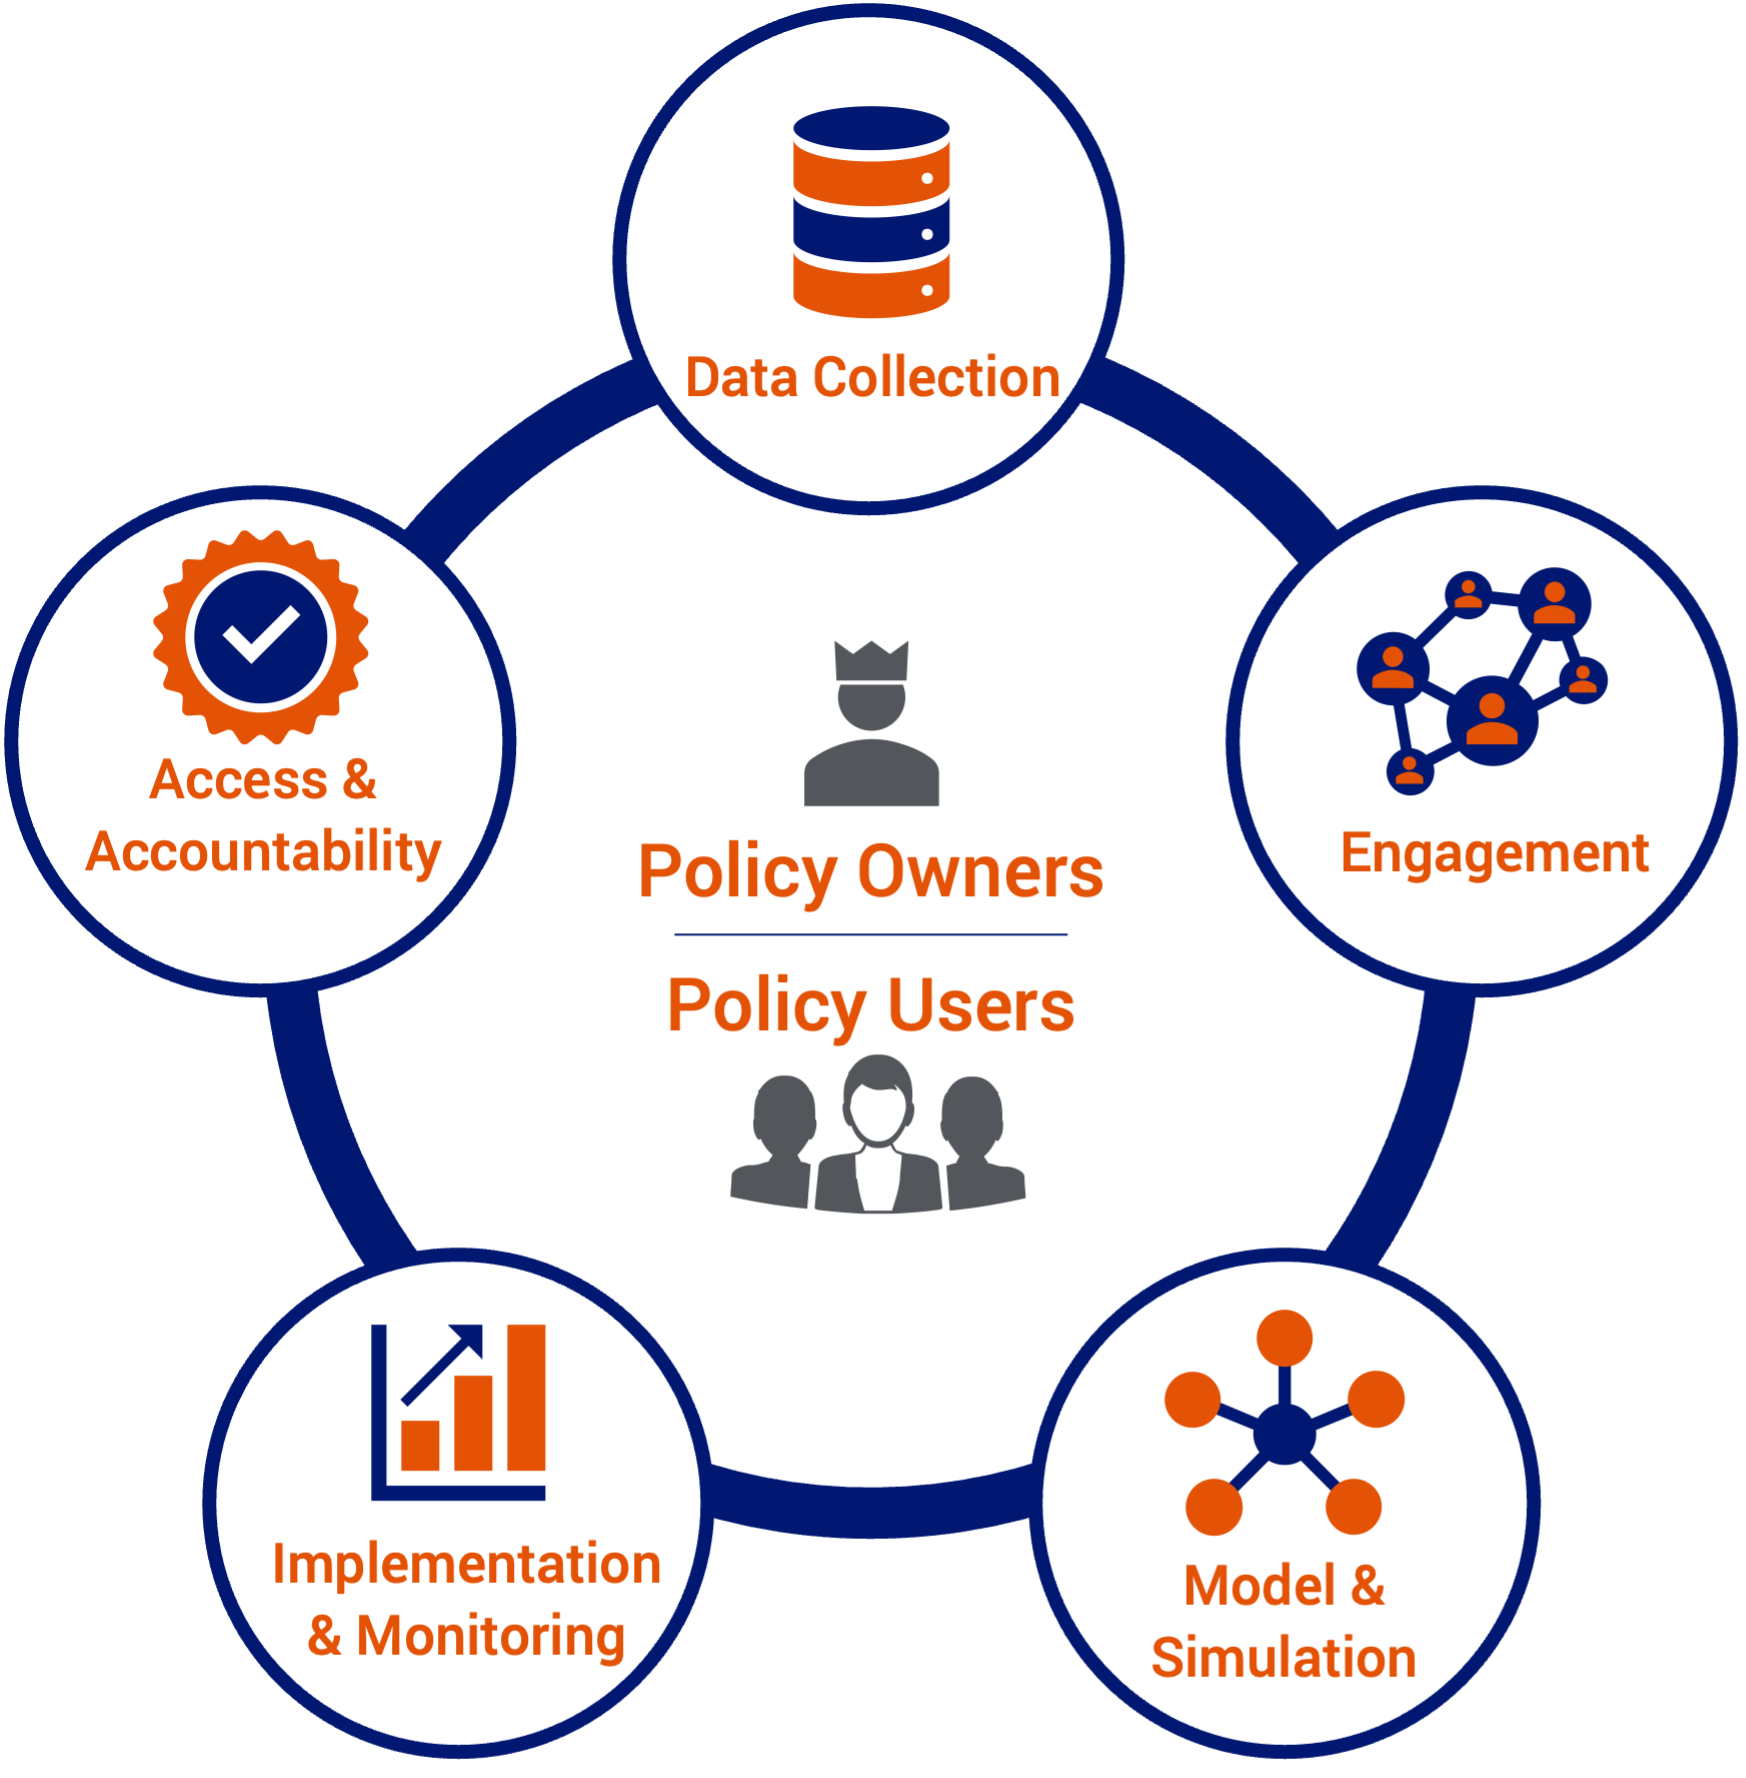 Policy Owners and Policy Users surrounded by Data Collection, Engagement, Model & Simulation, Implementation & Modeling, Access & Accountability